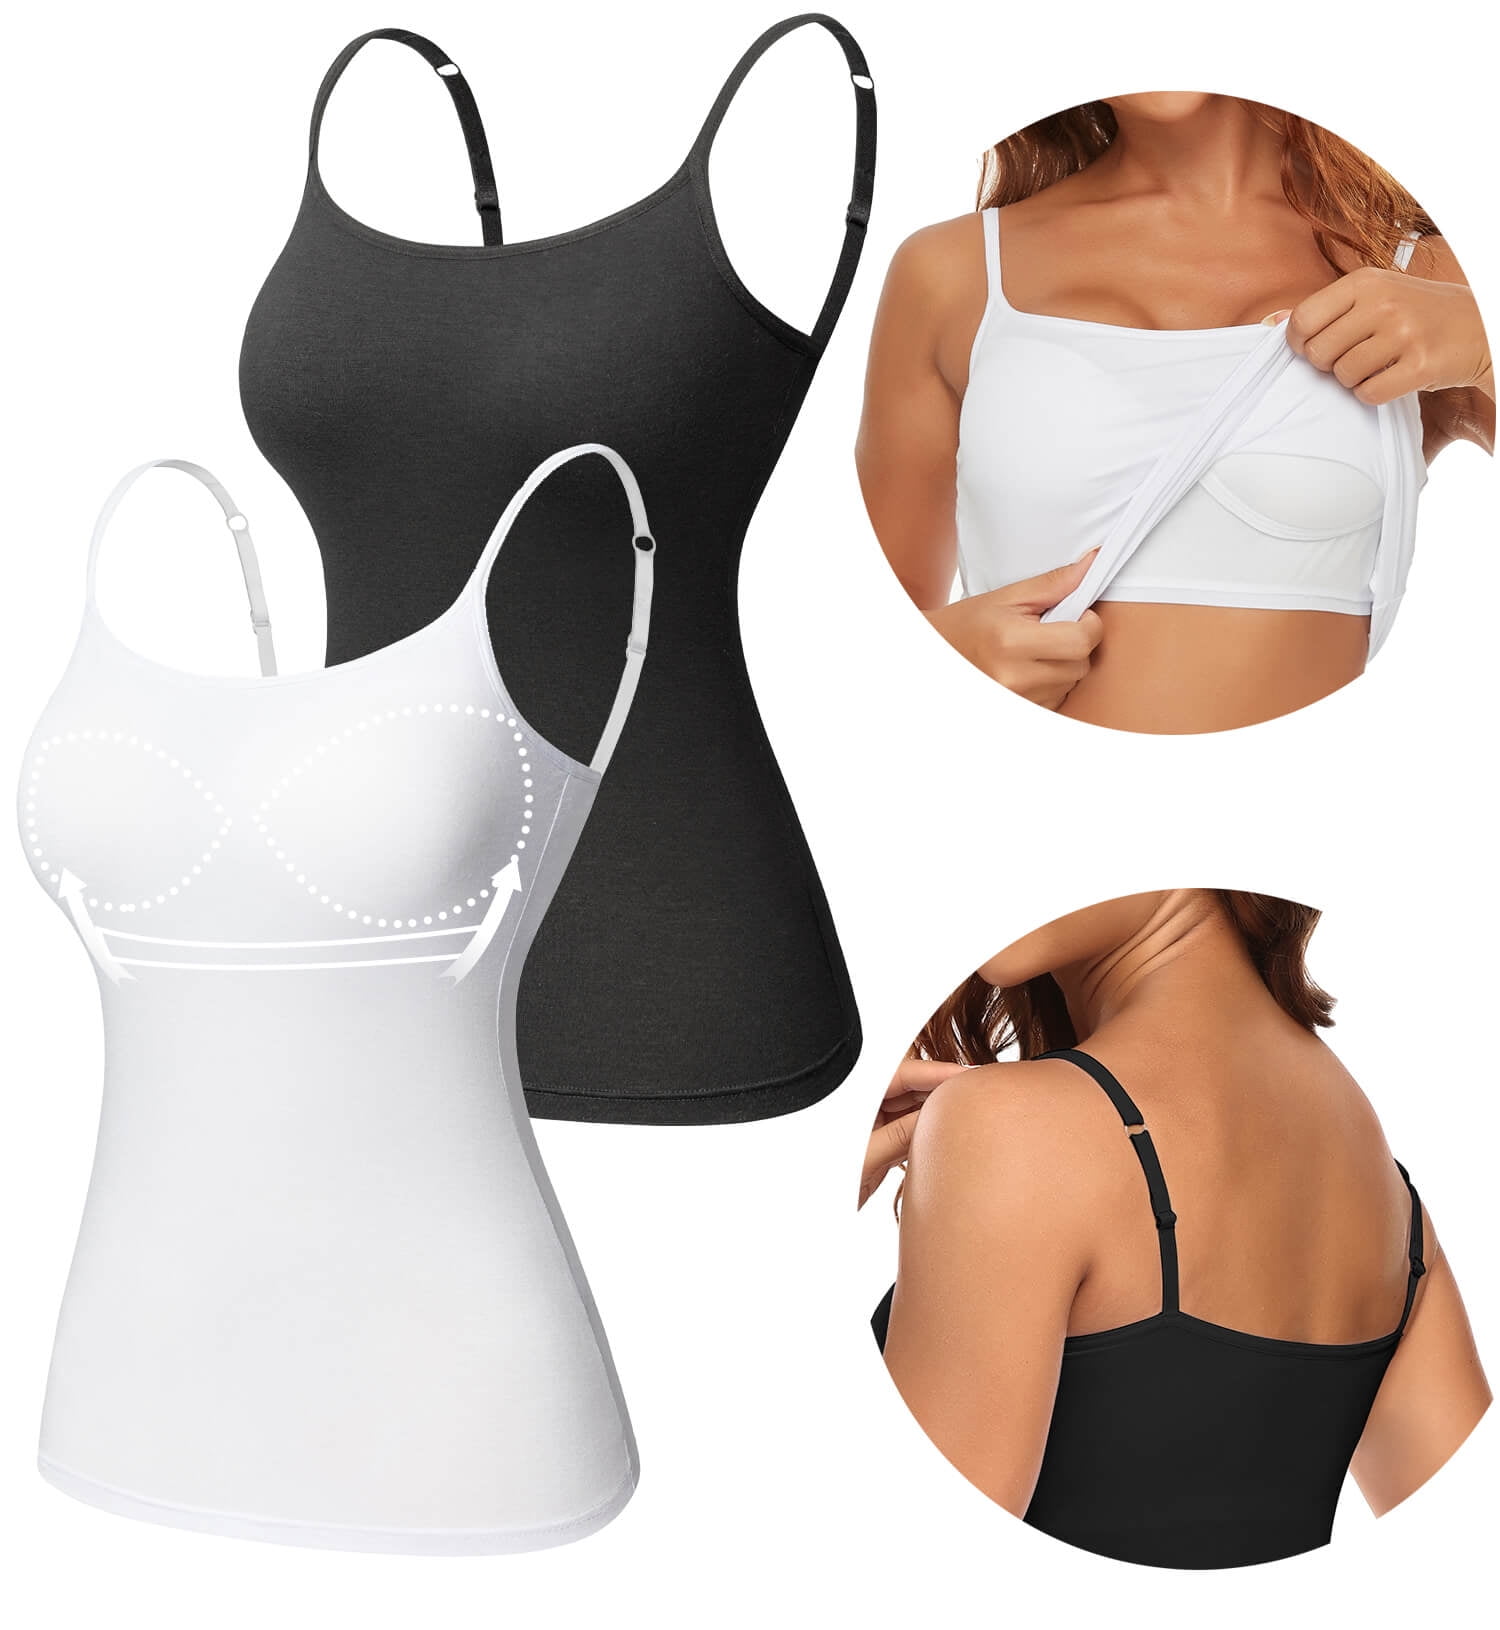 Bralette Cami Bra Wireless Tank Top Bra Sports Bra with Sponge Pad Camisole  Soft Chest Support Bras for Women Girls 4PCS, Type 1 at  Women's  Clothing store